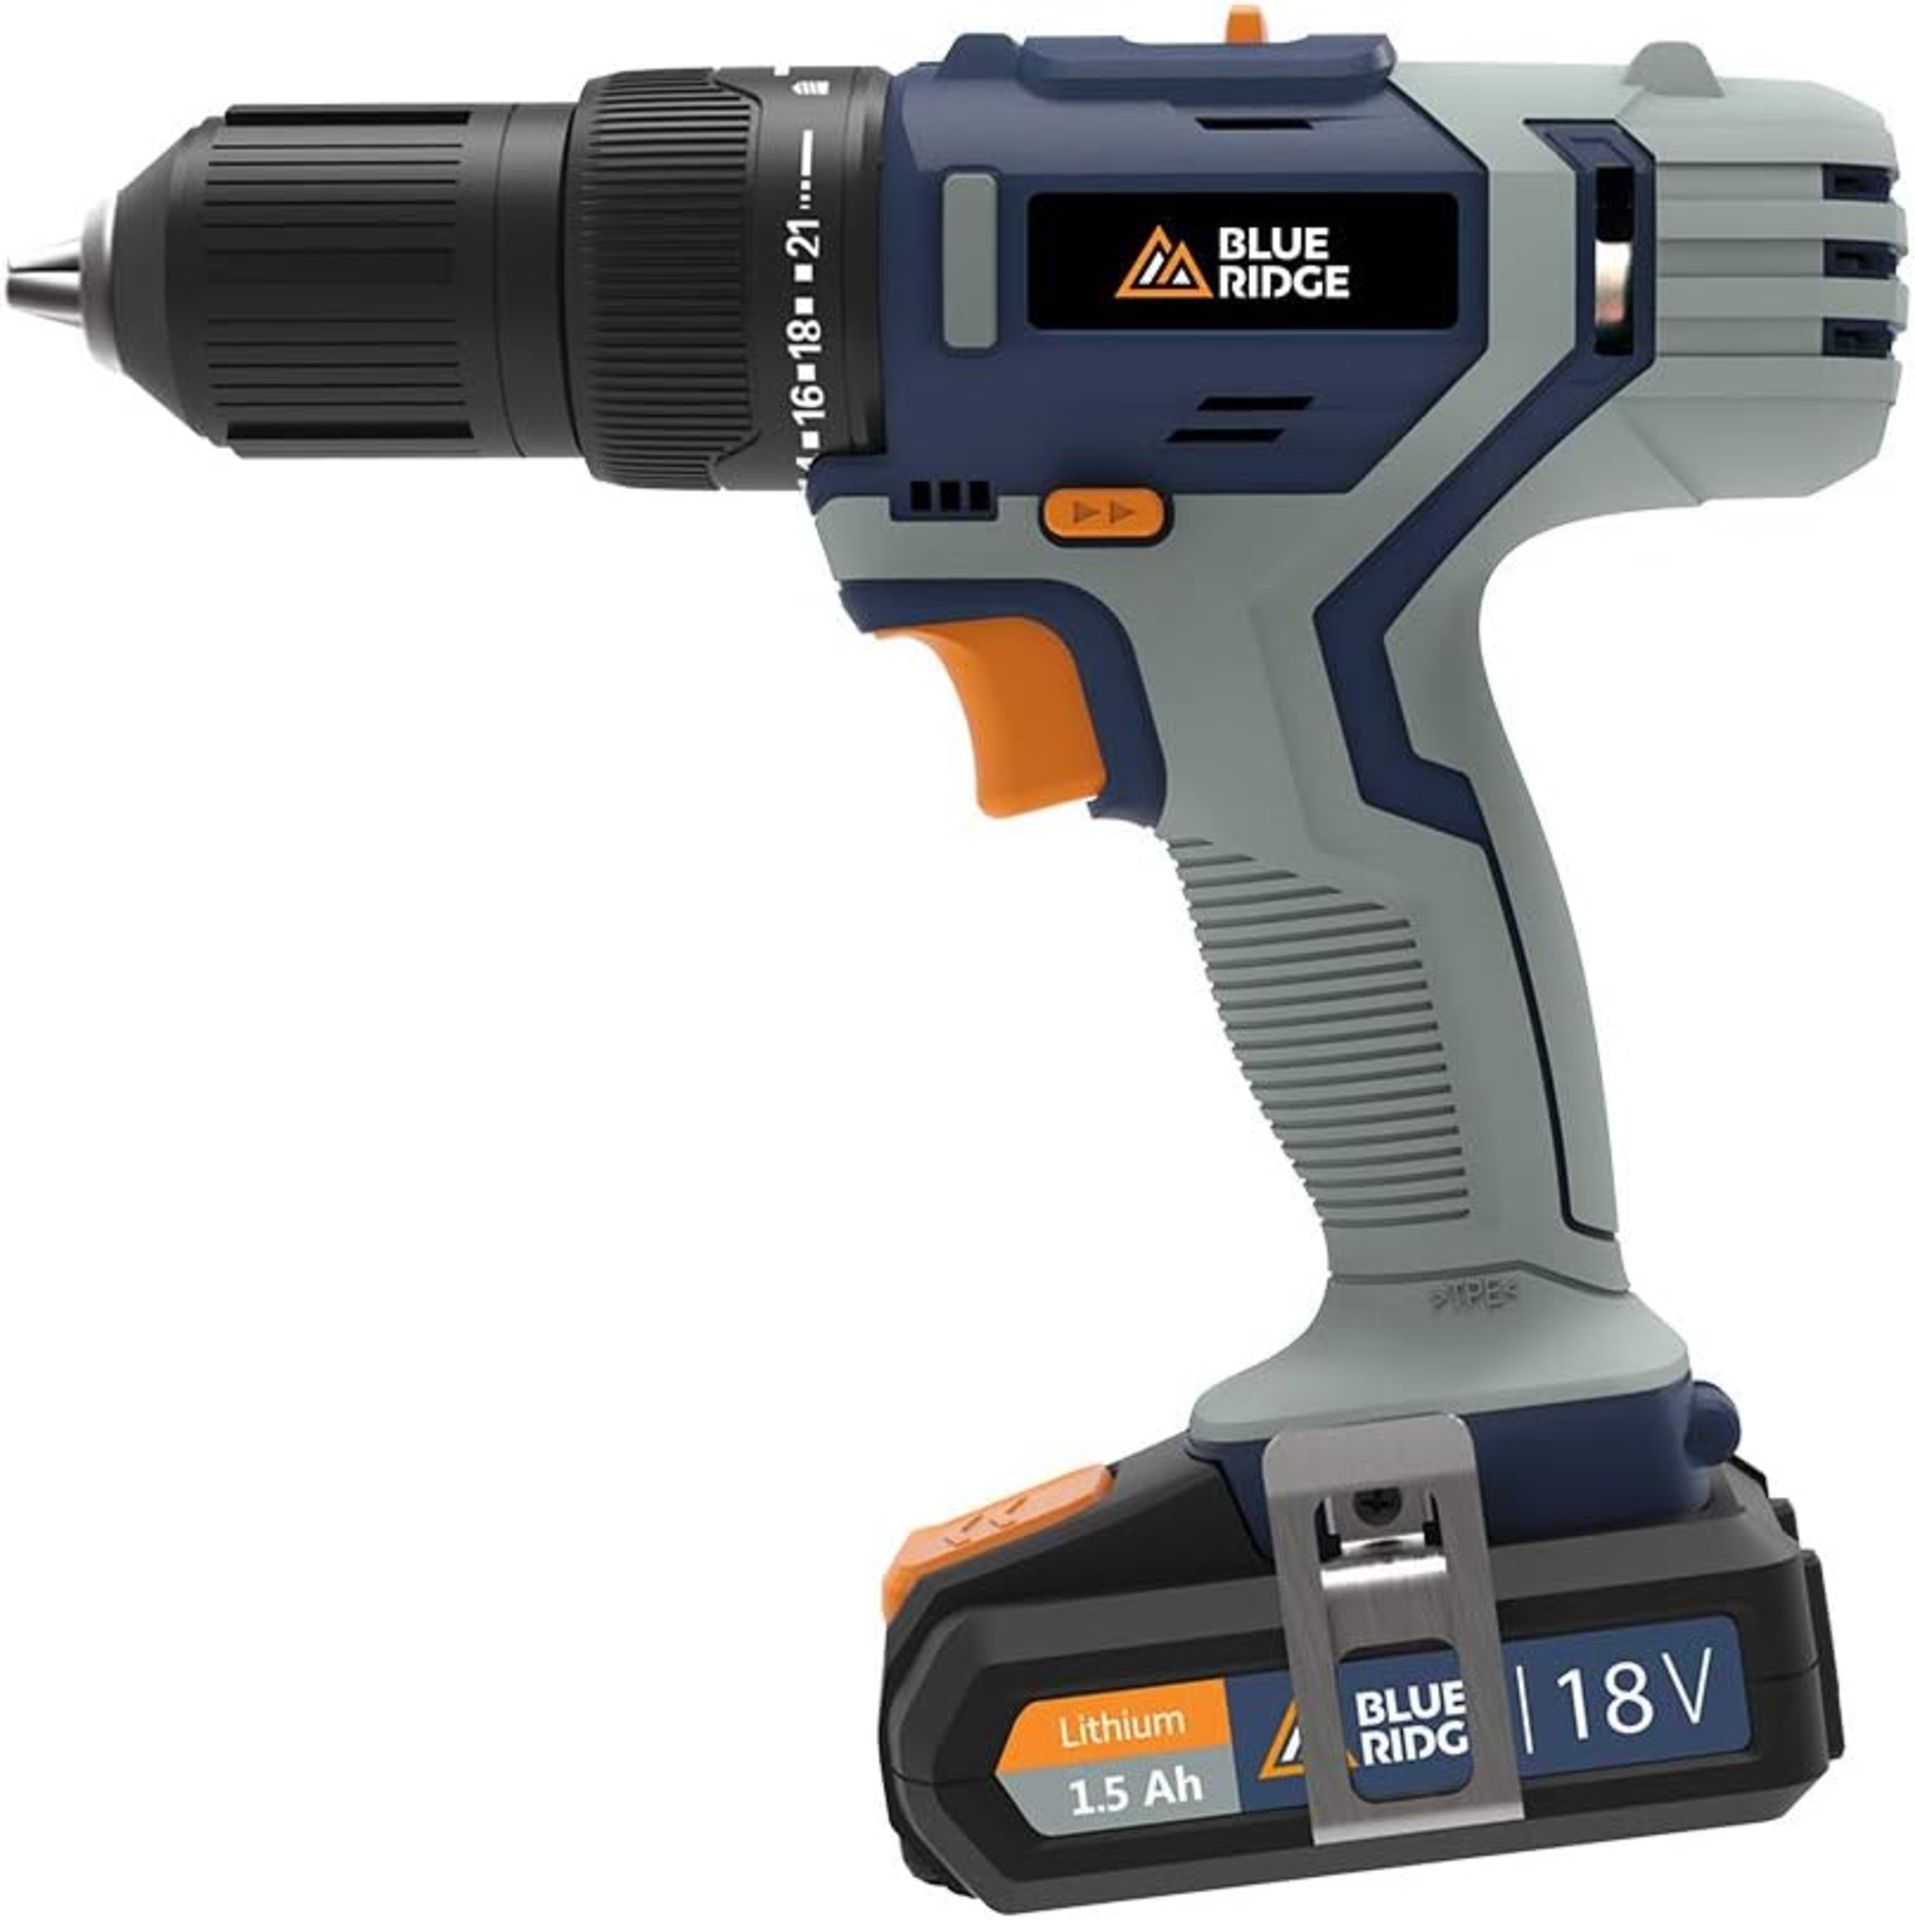 2x NEW & BOXED BLUE RIDGE 18V Cordless Hammer Drill with 2 x 1.5 Ah Li-ion Batteries & 43 Piece - Image 3 of 7